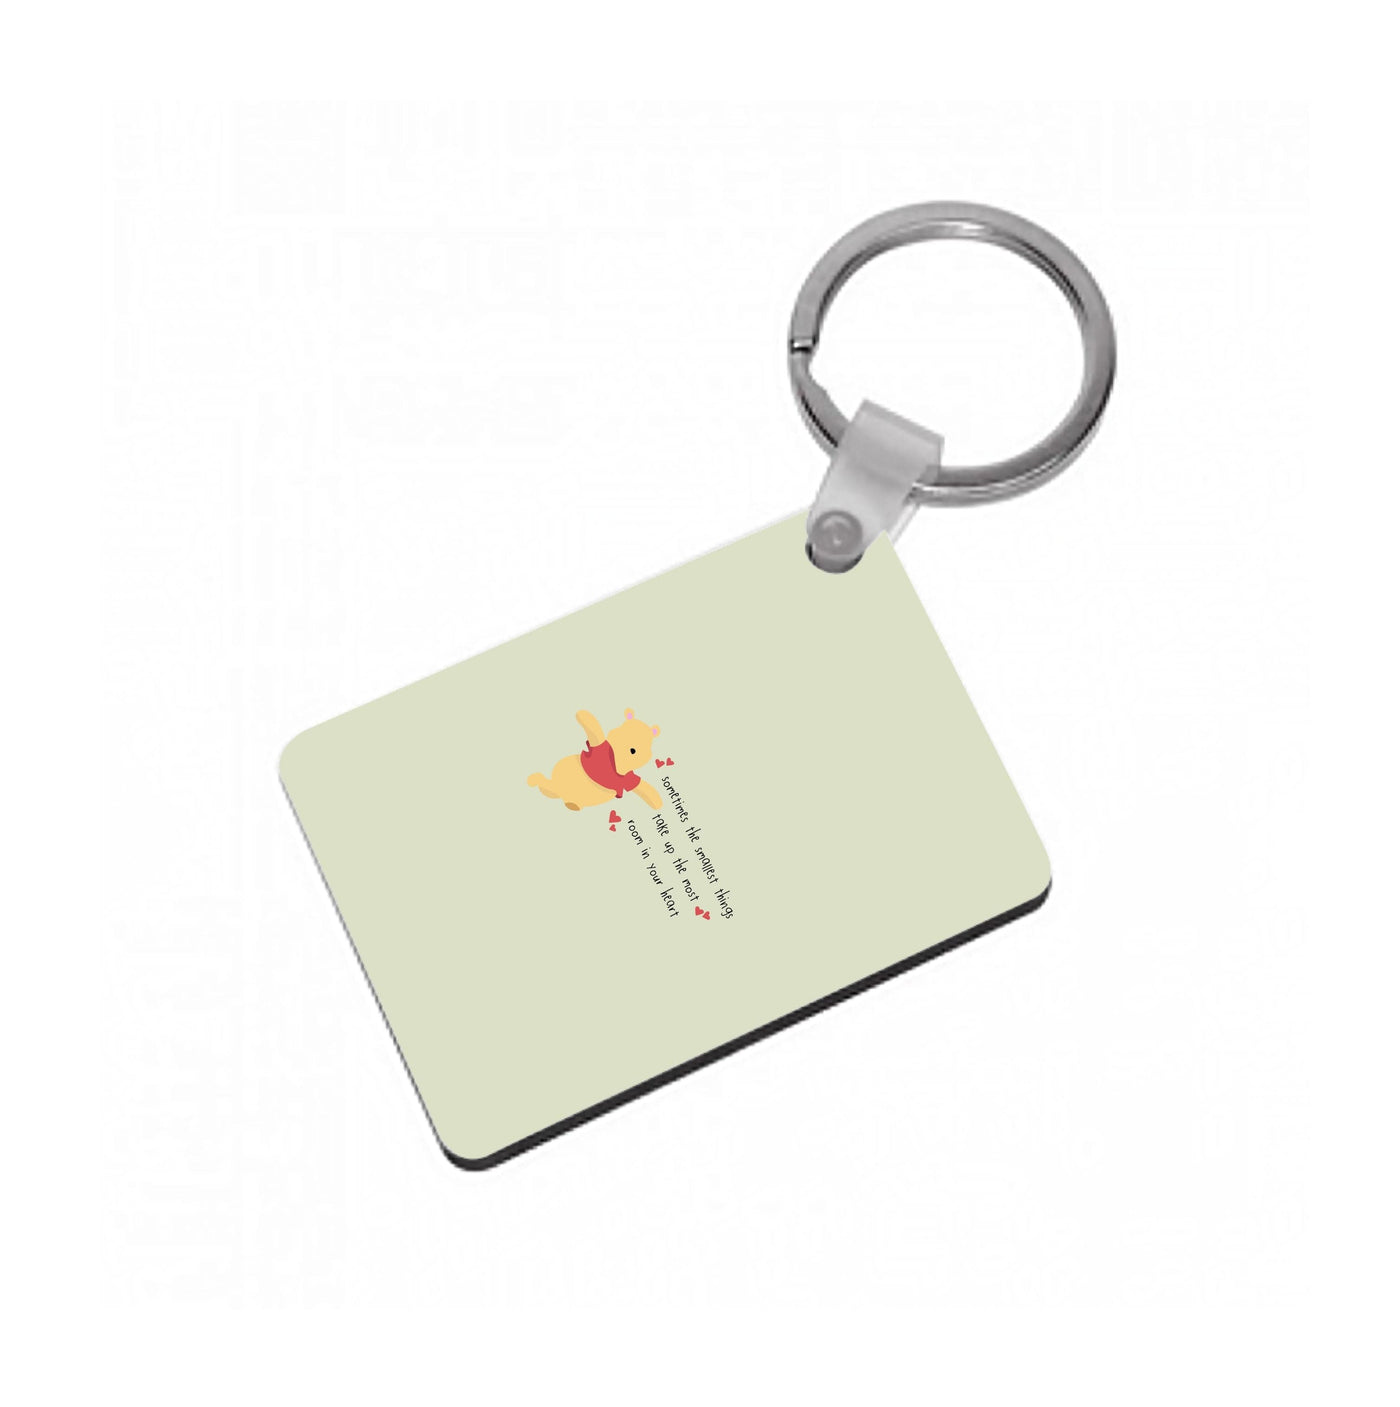 Take Up The Most Room - Winnie The Pooh Keyring